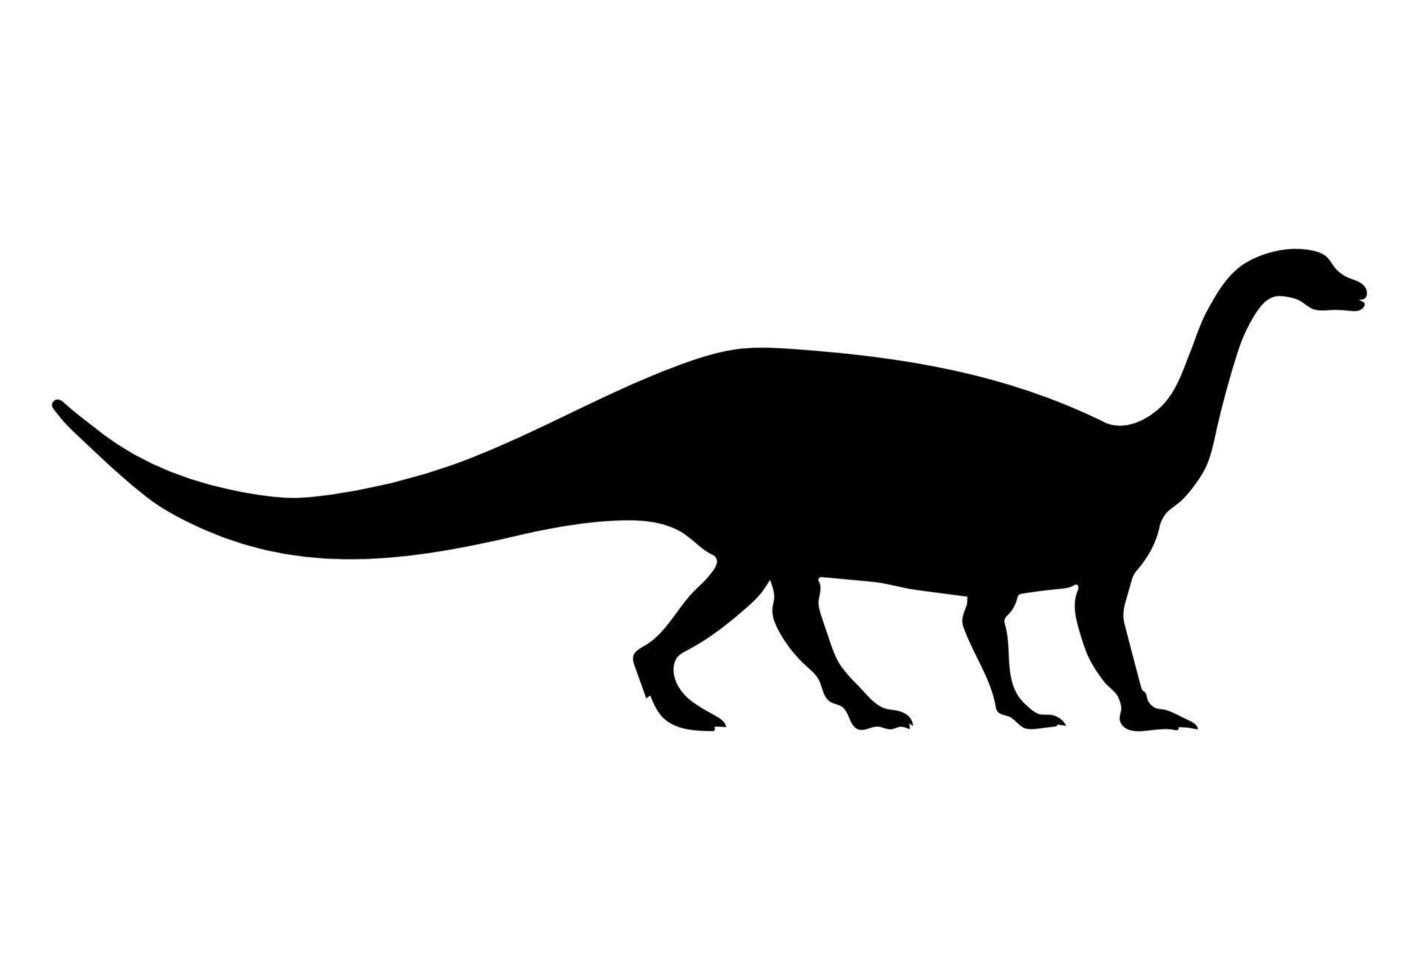 The silhouette of a dinosaur vector